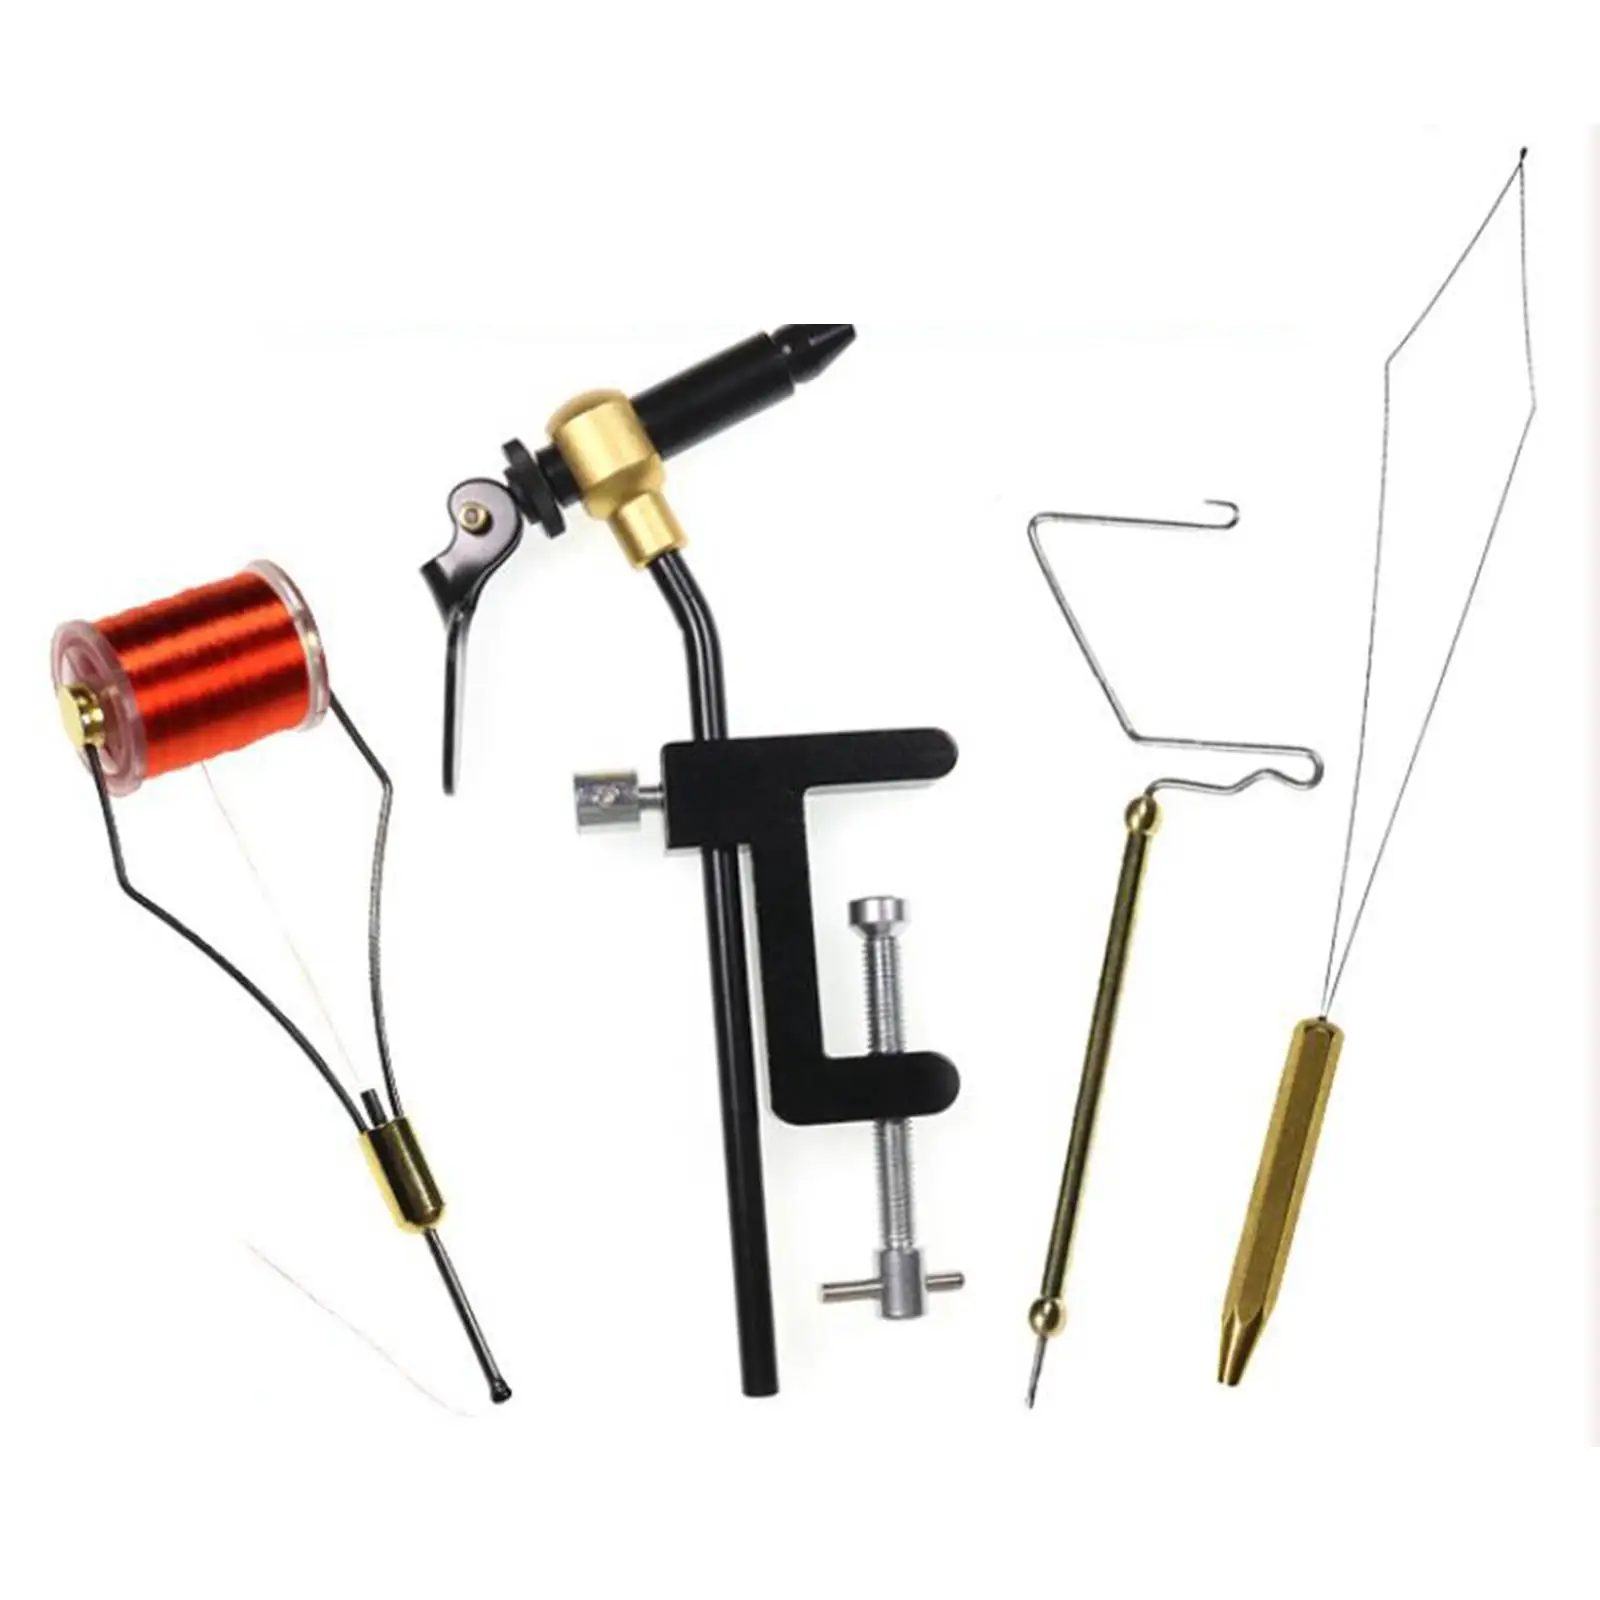 4Pcs Fly Tying Tool Kit Fishing Tackle Whip Finisher Outdoor Threader Fly Tying Vise